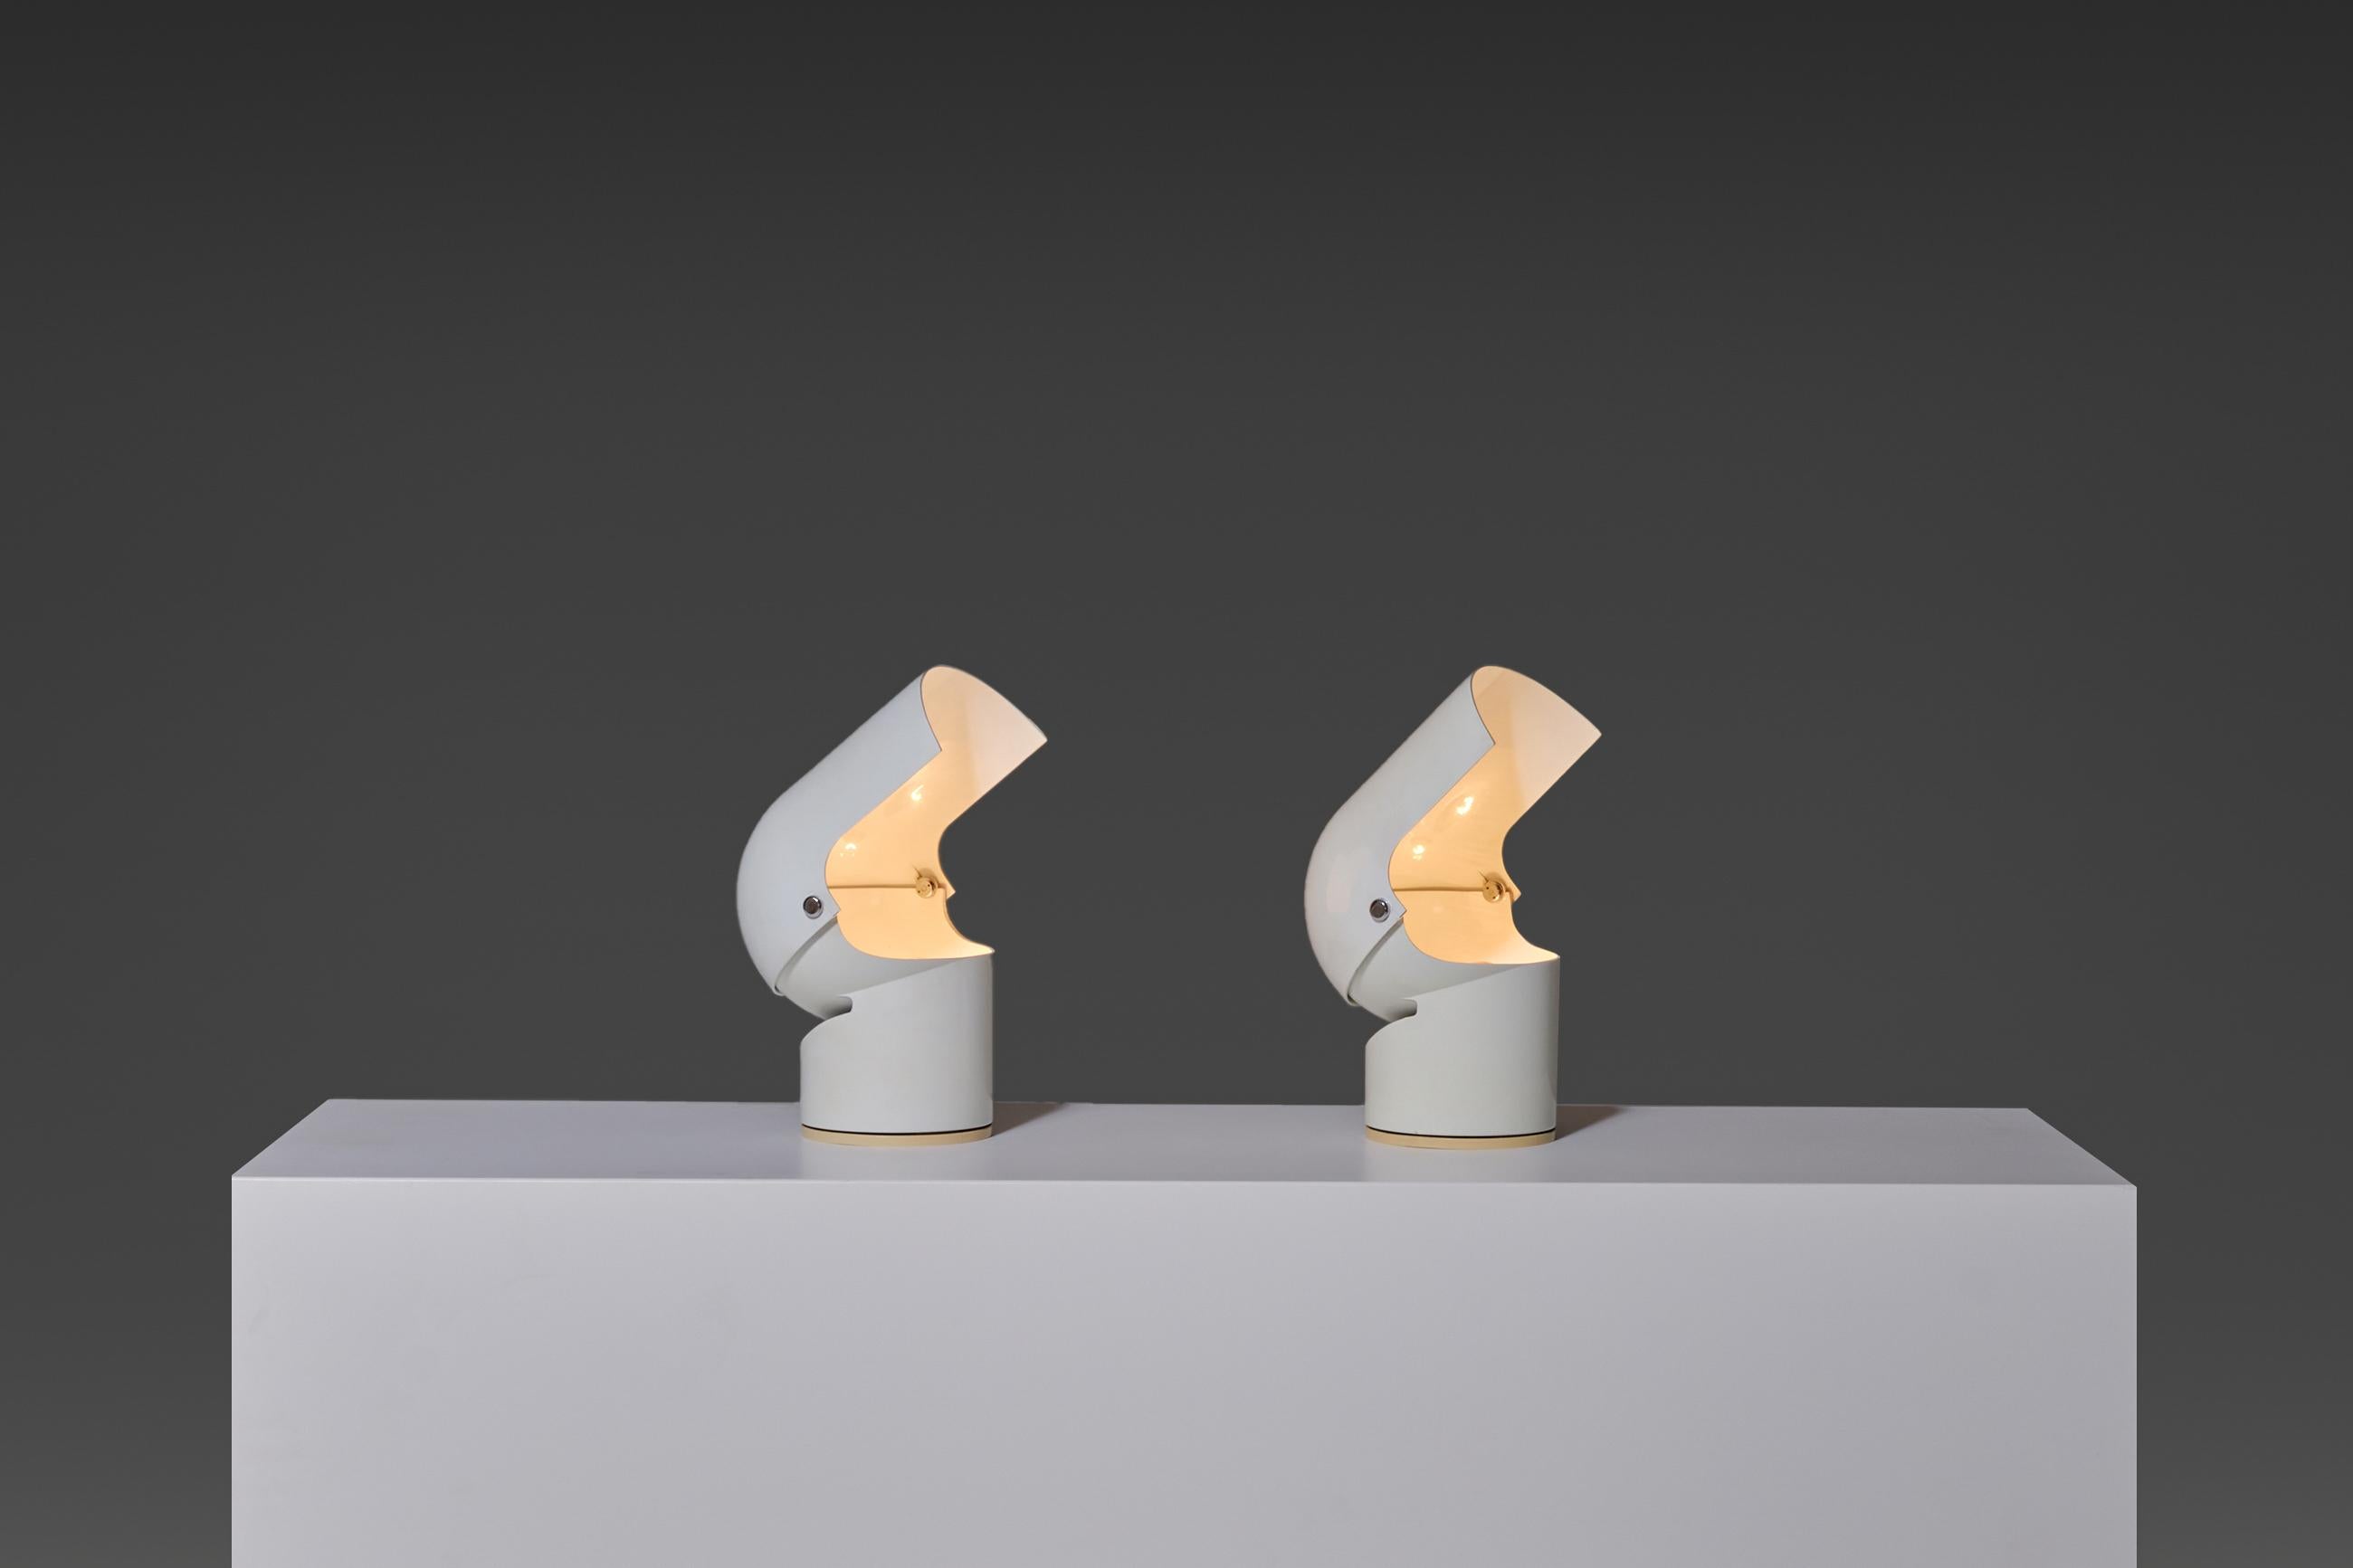 Set of two ‘Pileino’ table lamps by Gae Aulenti for Artemide, Italy 1972. Remarkable design named after the pileus due to it’s mushroom shaped cap, made in white lacquered aluminium. The shade and base can be adjusted in a number of different